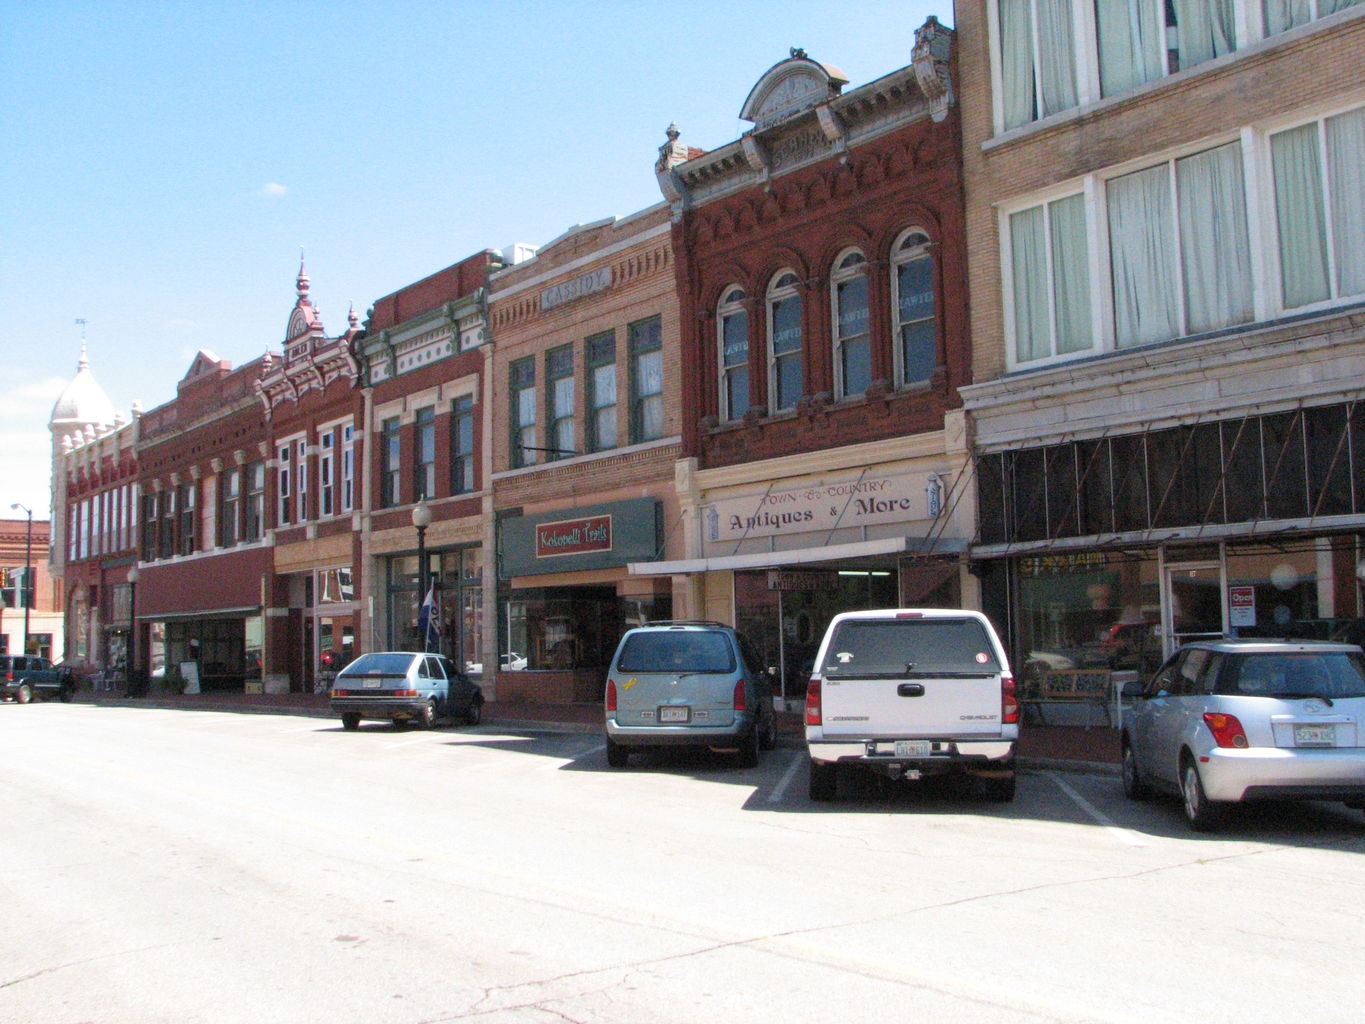 Visit to Guthrie, Oklahoma
